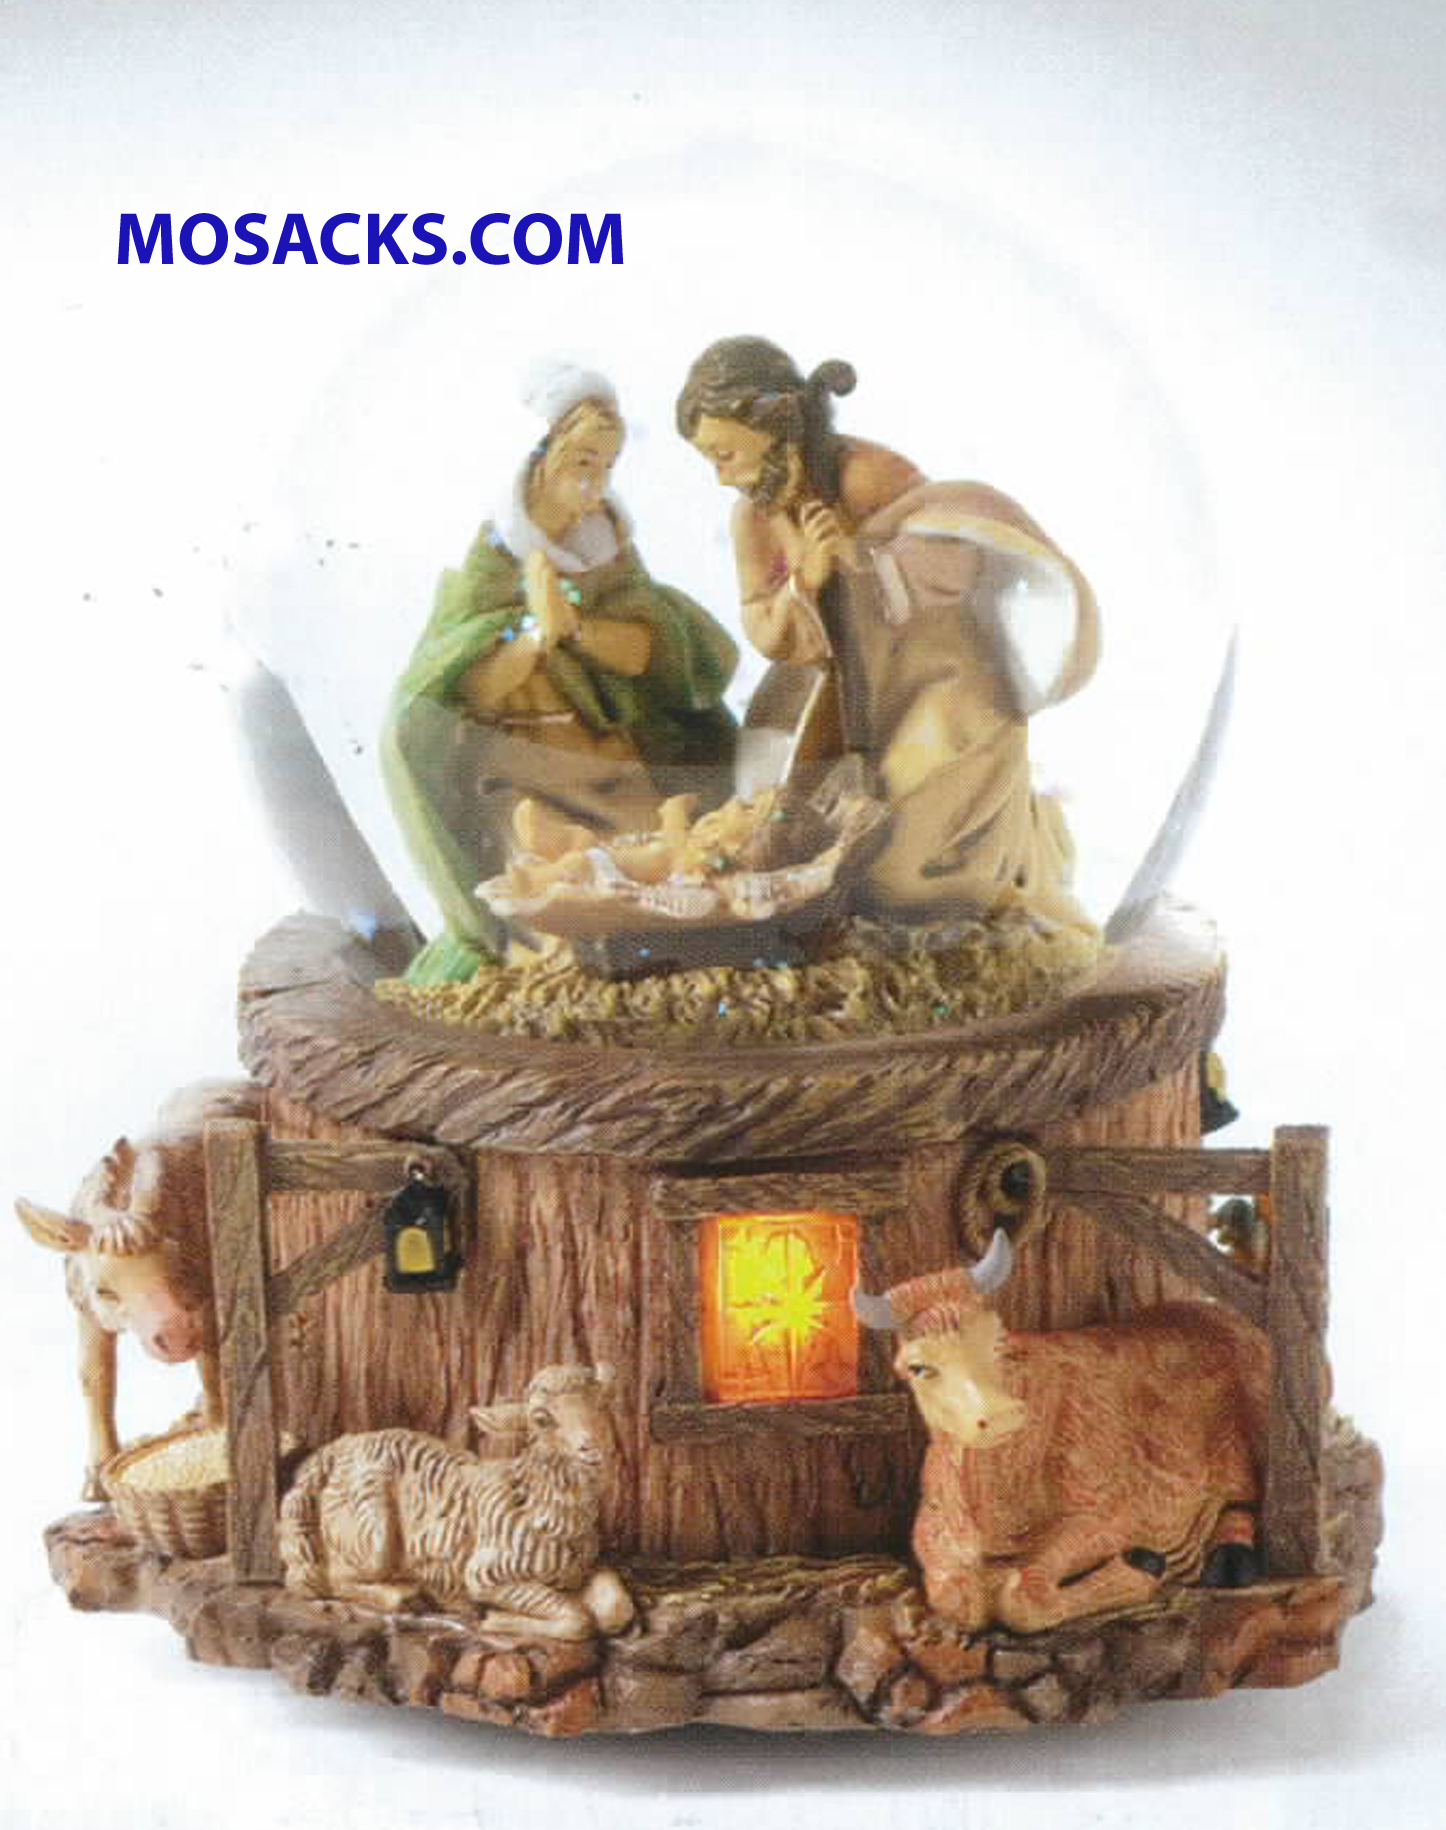 Fontanini Glitterdomes Stable Scene 5.75" H 20-66129 with Windows that Light Up and plays "Silent Night."